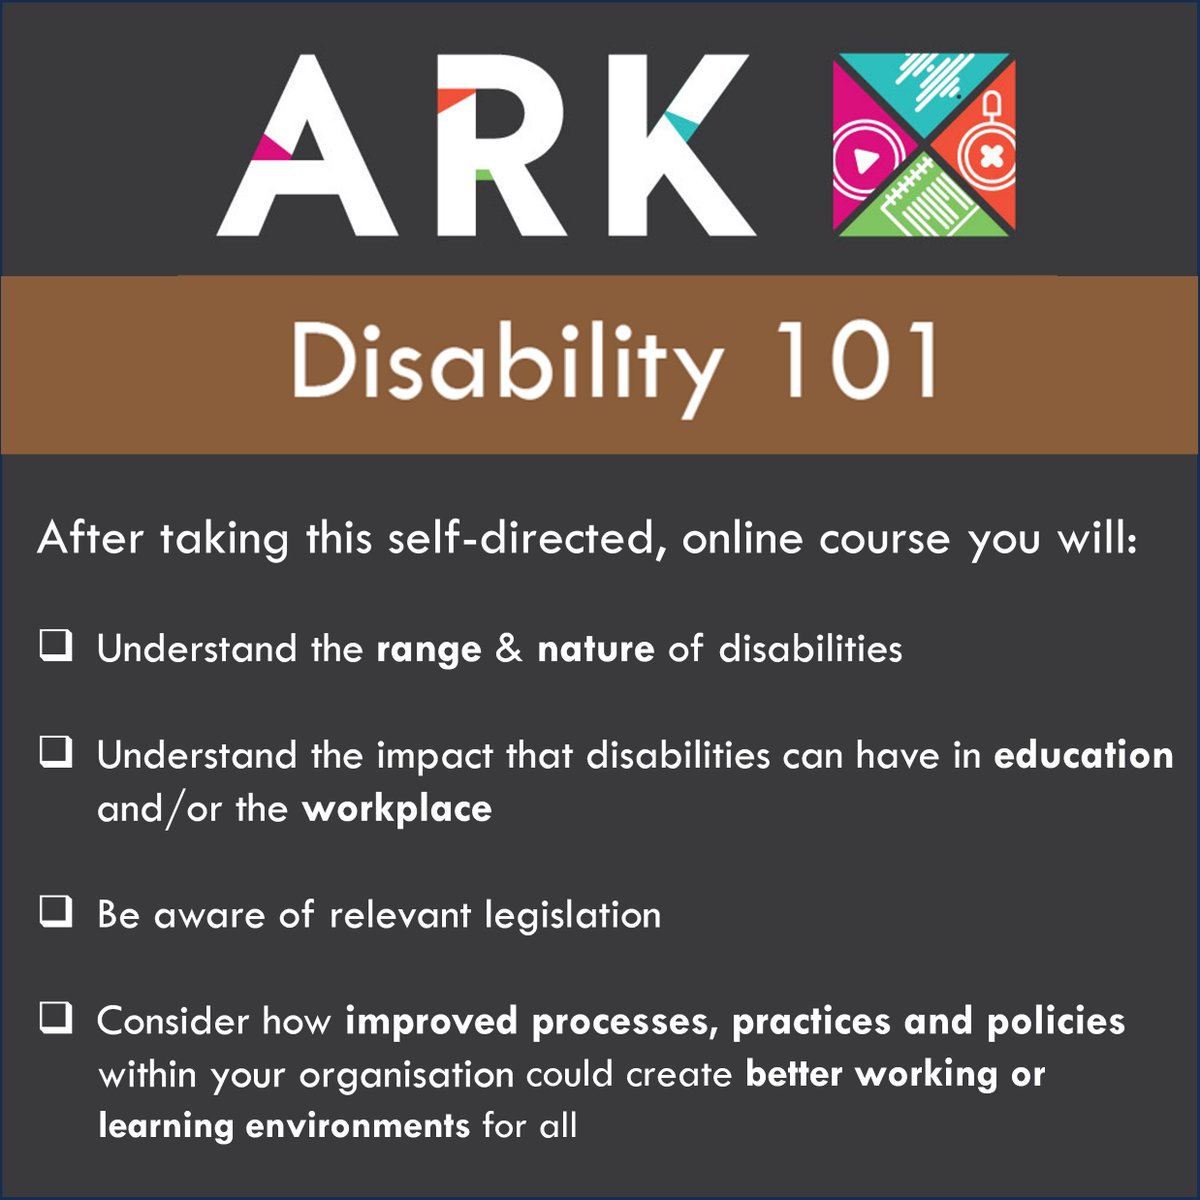 Need a new year's resolution? Why not get disability-aware with our online, self-directed course Disability 101. 90-120 mins ⌛ Receive a digital badge 🏆 Boost your ability to support people with disabilities in work & education contexts 📚 Visit - buff.ly/3Gb5hzf